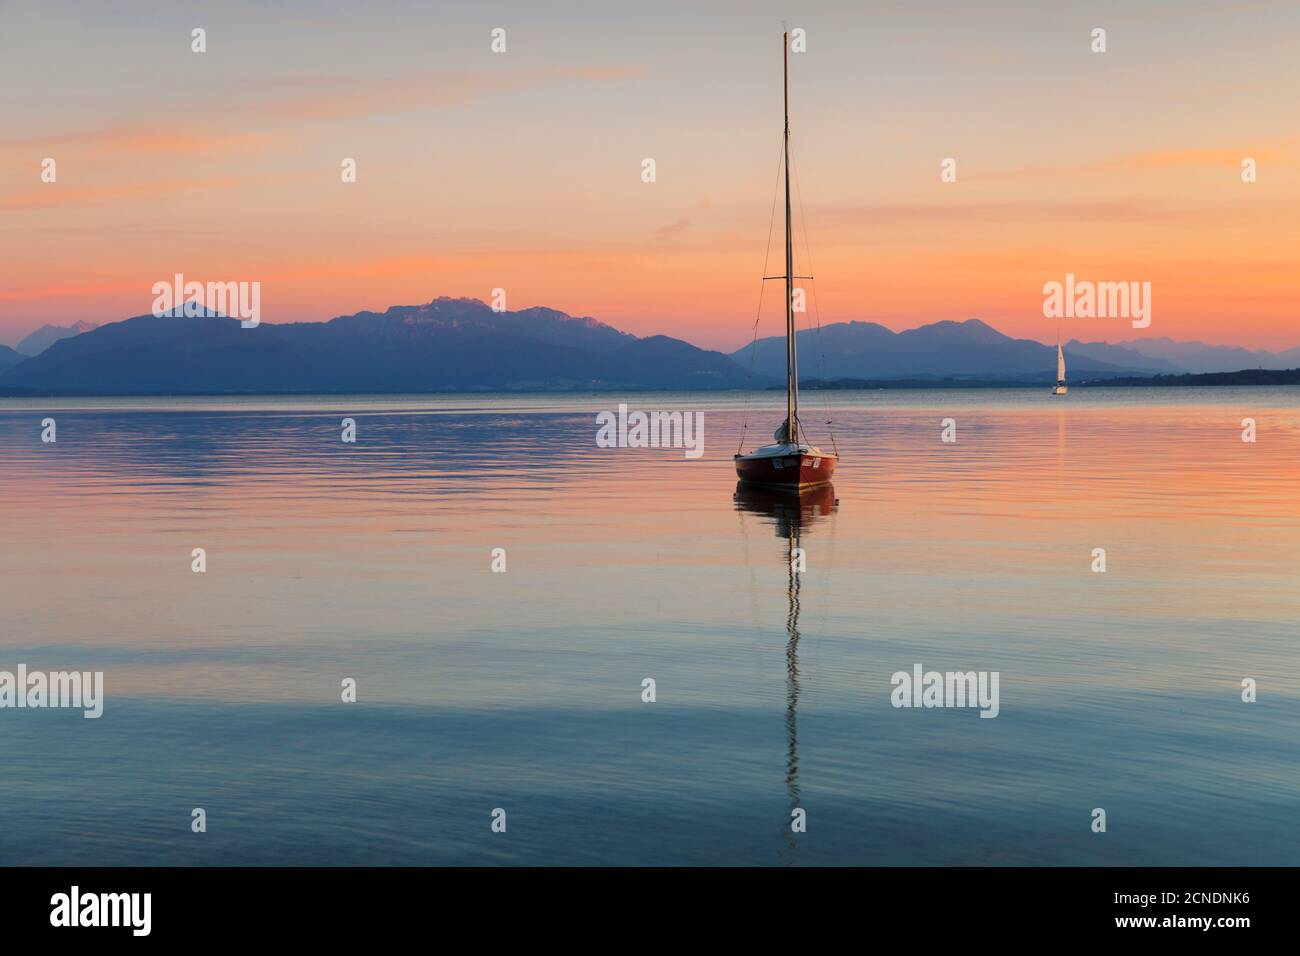 Upper Boat High Resolution Stock Photography and Images - Alamy